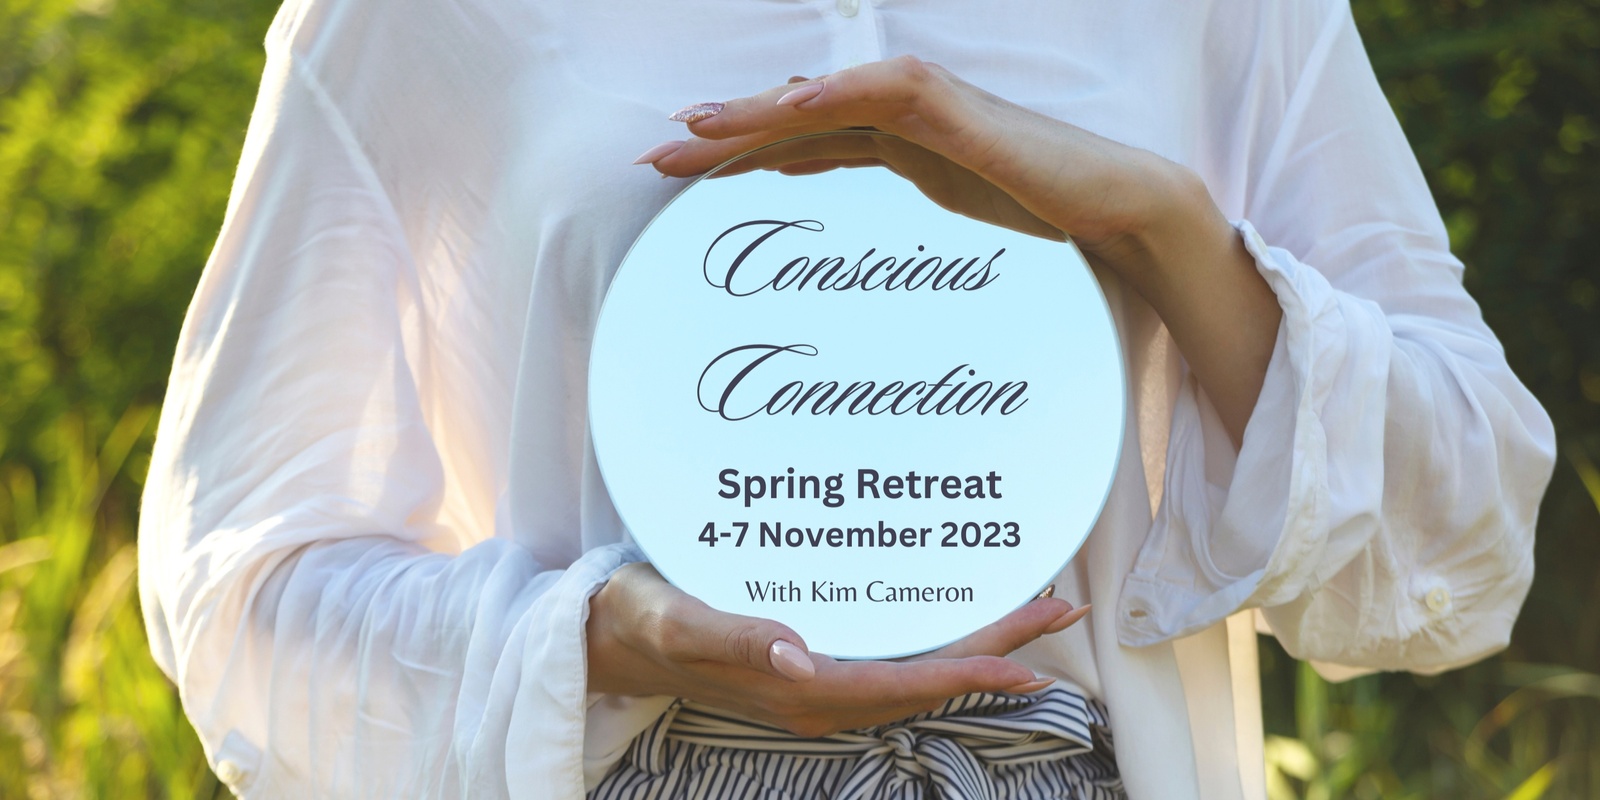 Banner image for Conscious Connection 4 Day Spring Retreat for Women - Hunter Valley Hinterland